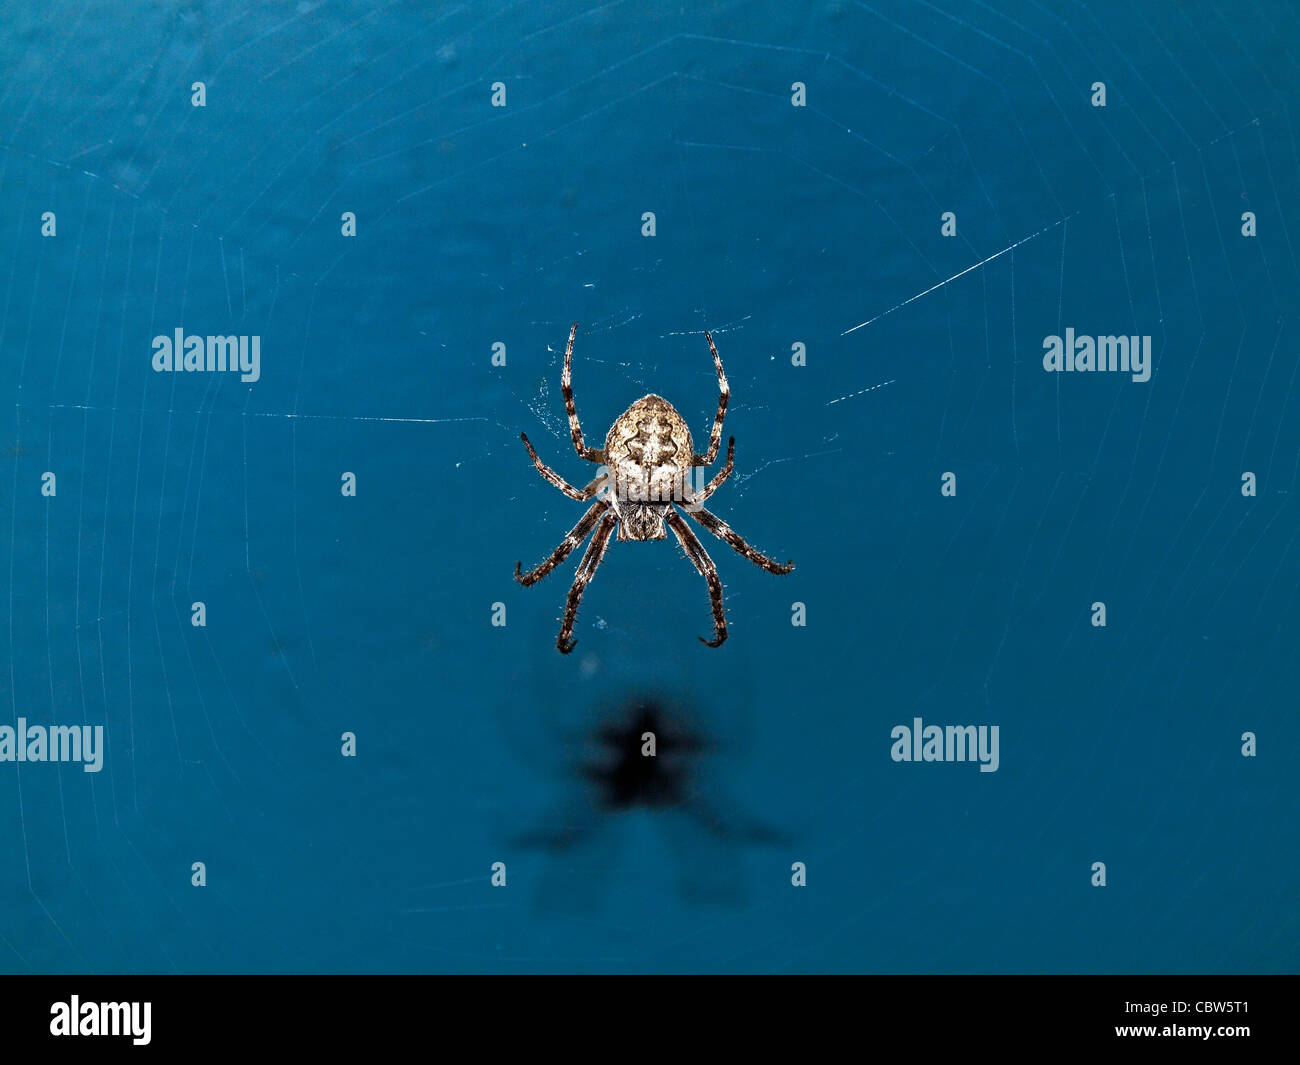 Orb weaving spider (family Araneidae); likely in the genus Araneus. Photographed at night in Budapest, Hungary Stock Photo